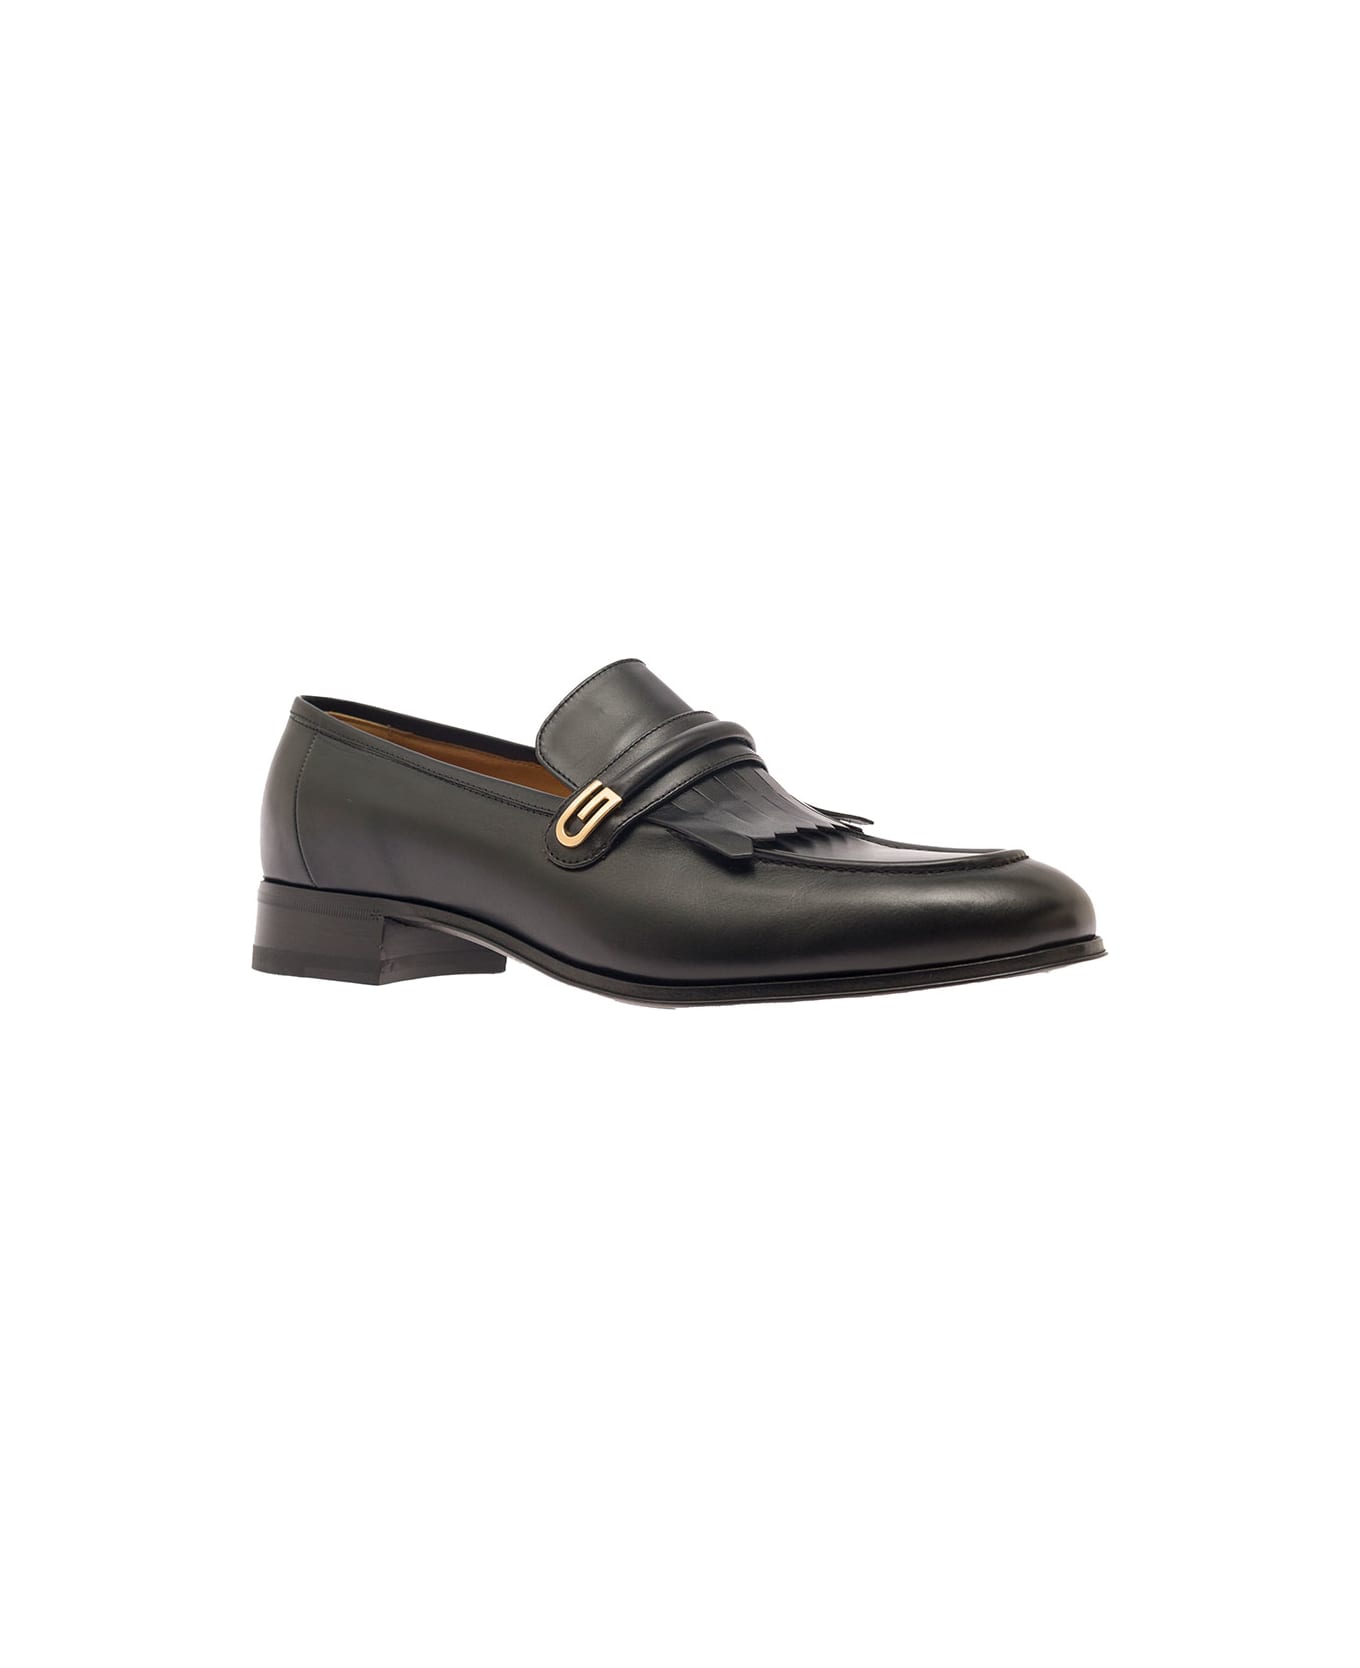 Gucci Leather Loafers - Black ローファー＆デッキシューズ